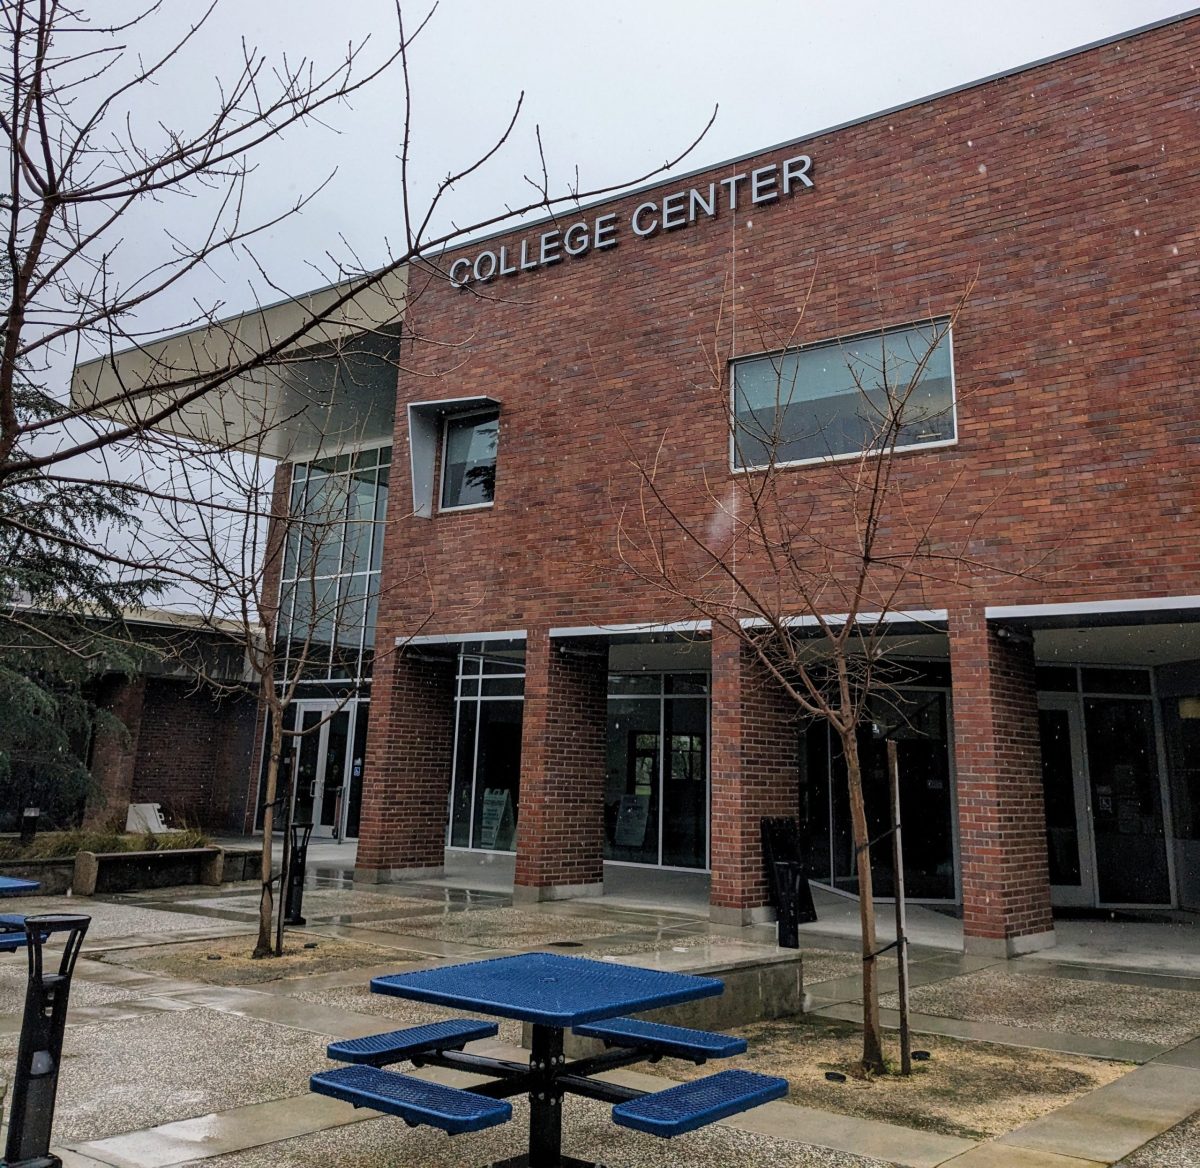 The College Center building on campus is where students can meet with administration, financial aid, counselors and obtain a student identification card. The College Center is also a place for students to relax and study, according to the campus website.